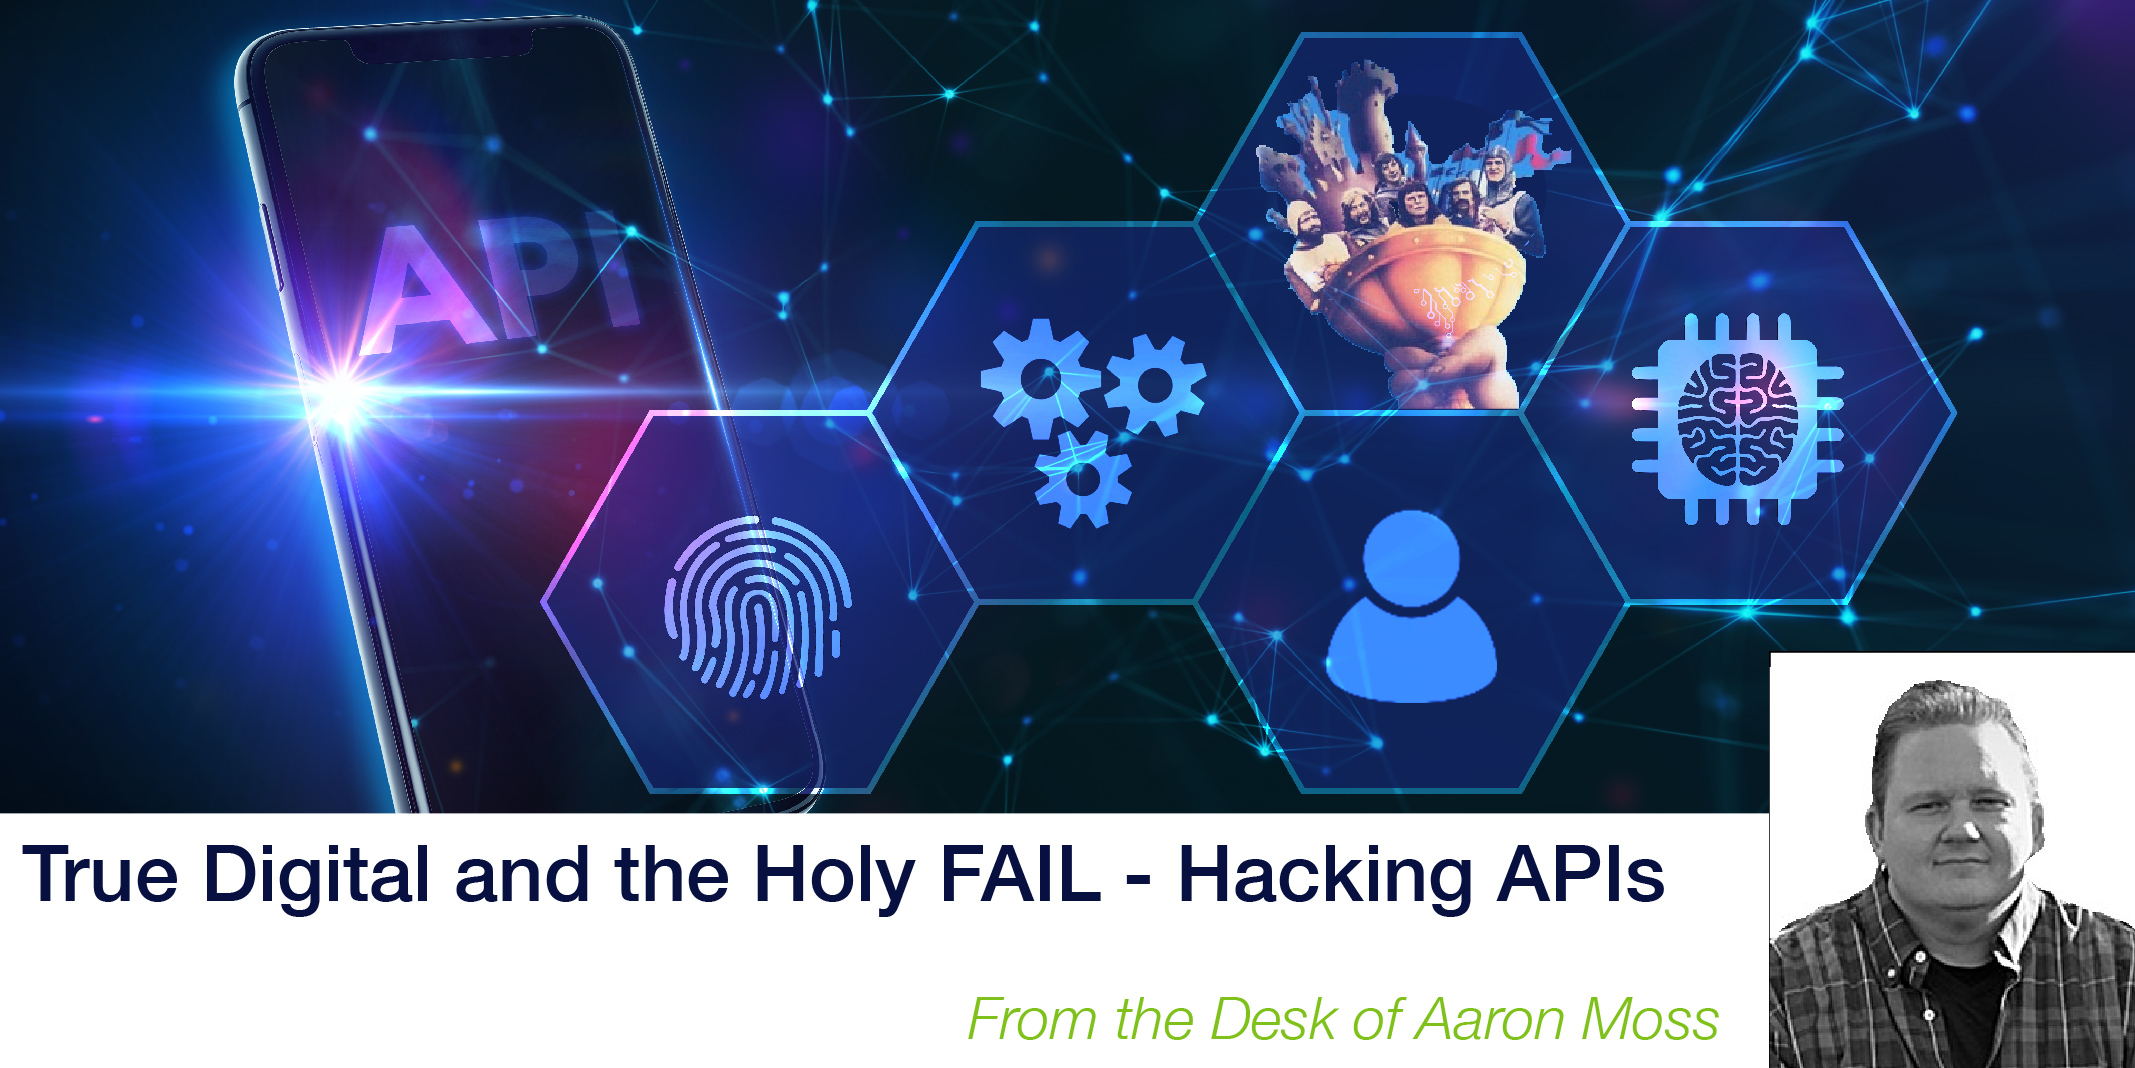 True Digital and the Holy FAIL - Hacking APIs